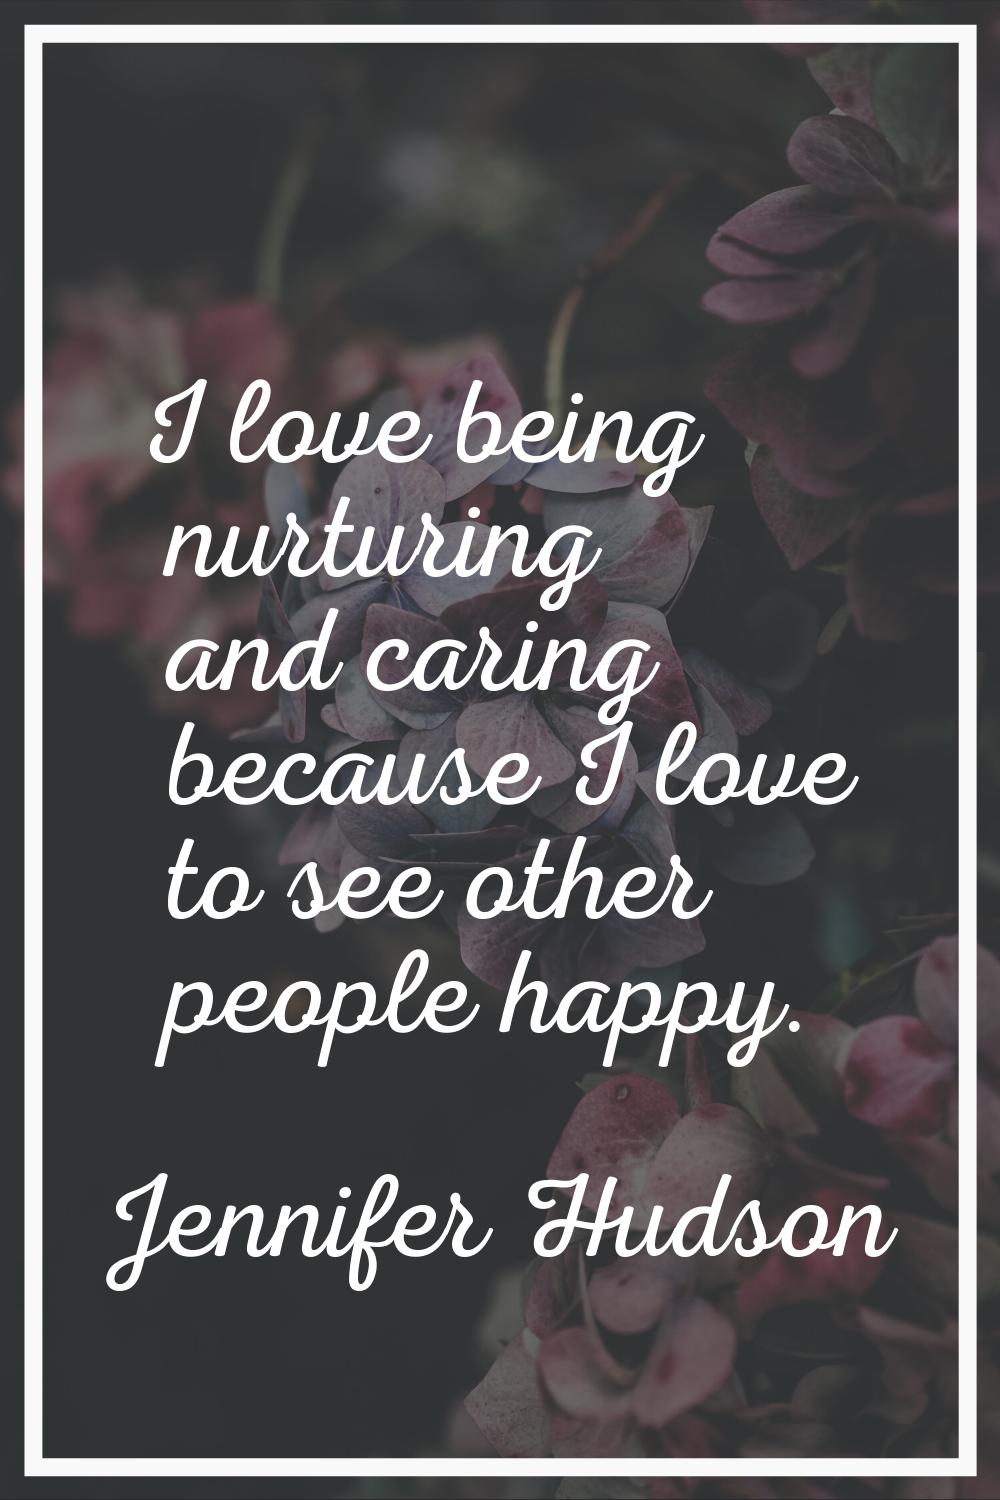 I love being nurturing and caring because I love to see other people happy.